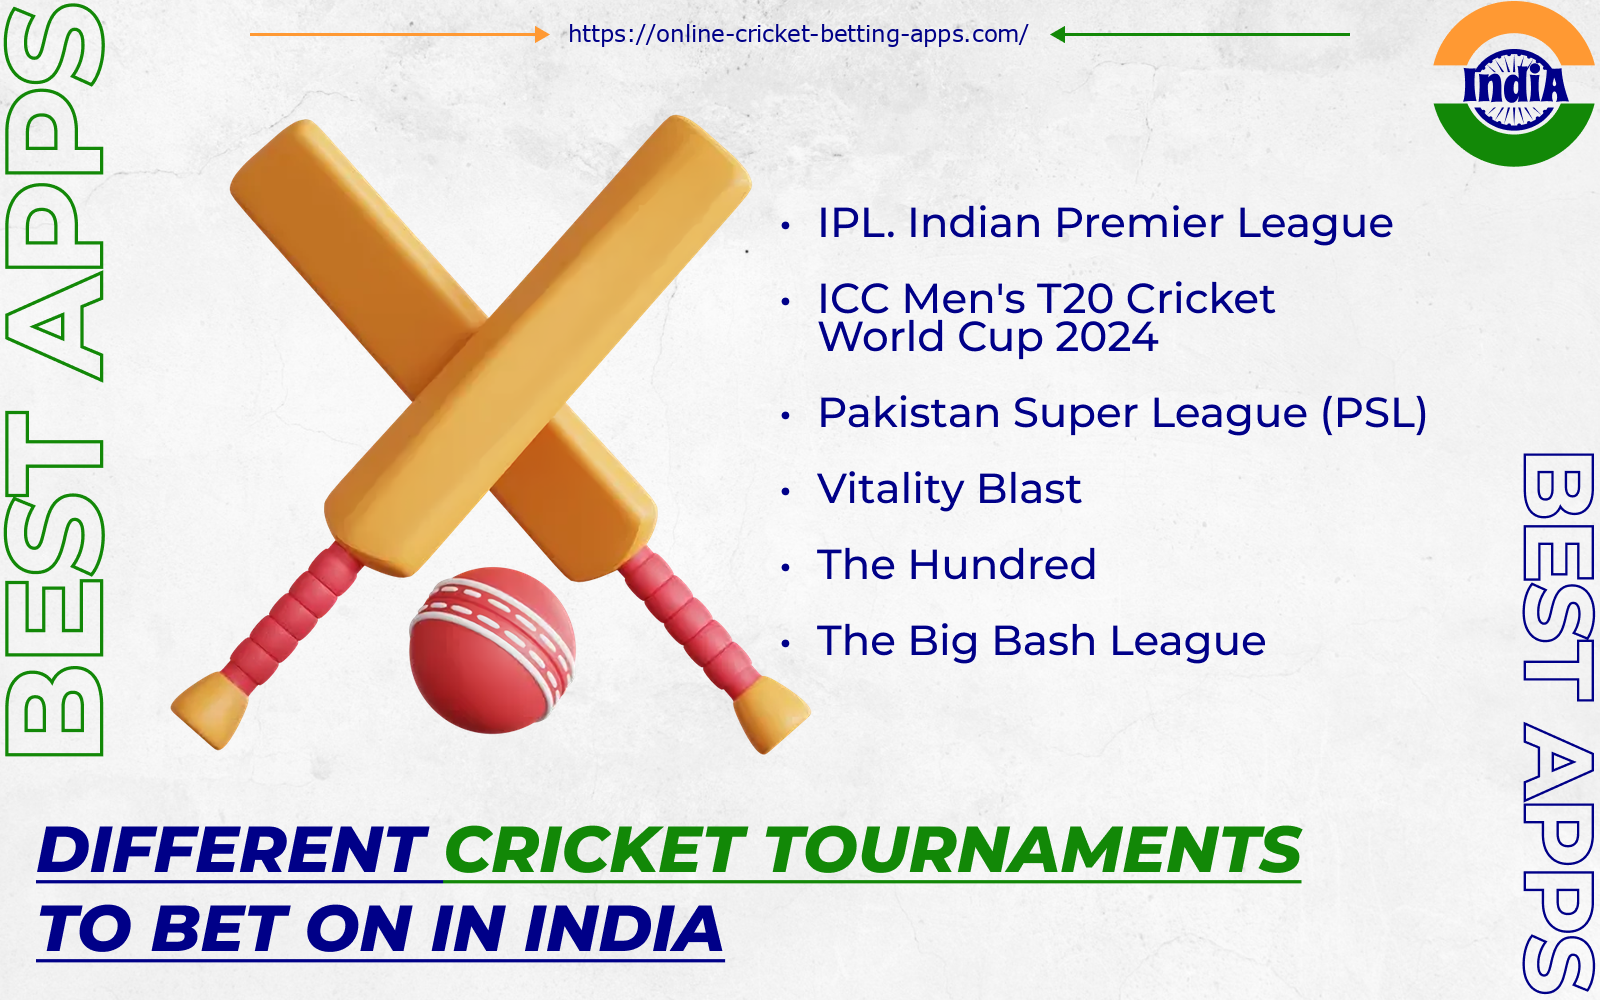 Using cricket betting apps, Indian bettors can bet on any official tournament, both international and regional